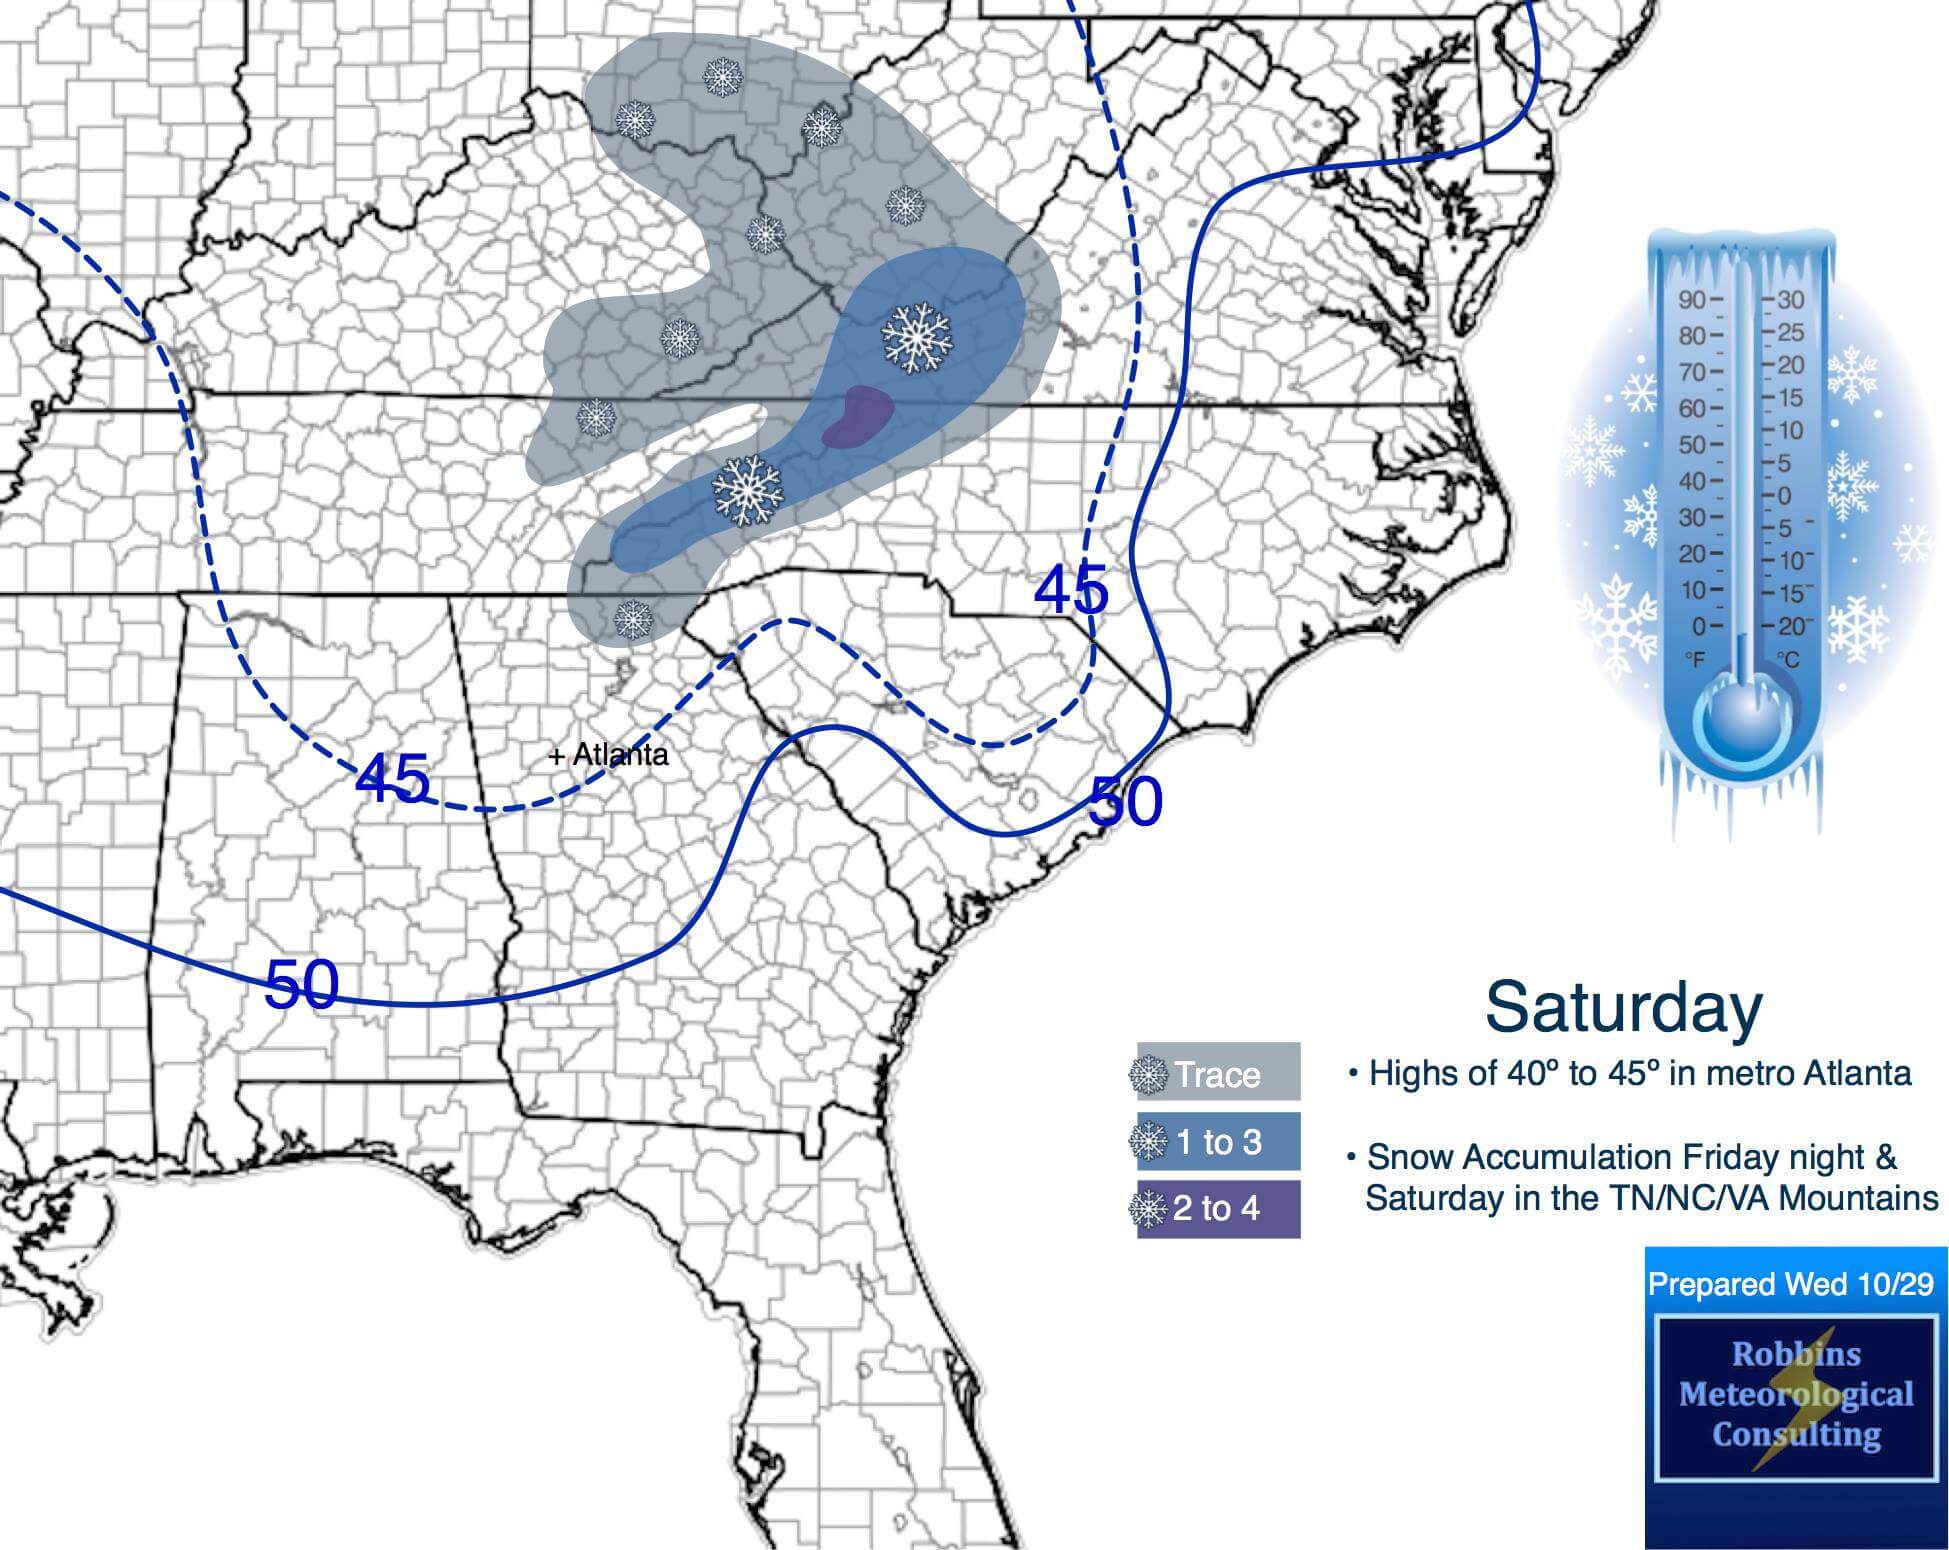 Atlanta's Strongest Cold Front so far this Season by Halloween Weekend